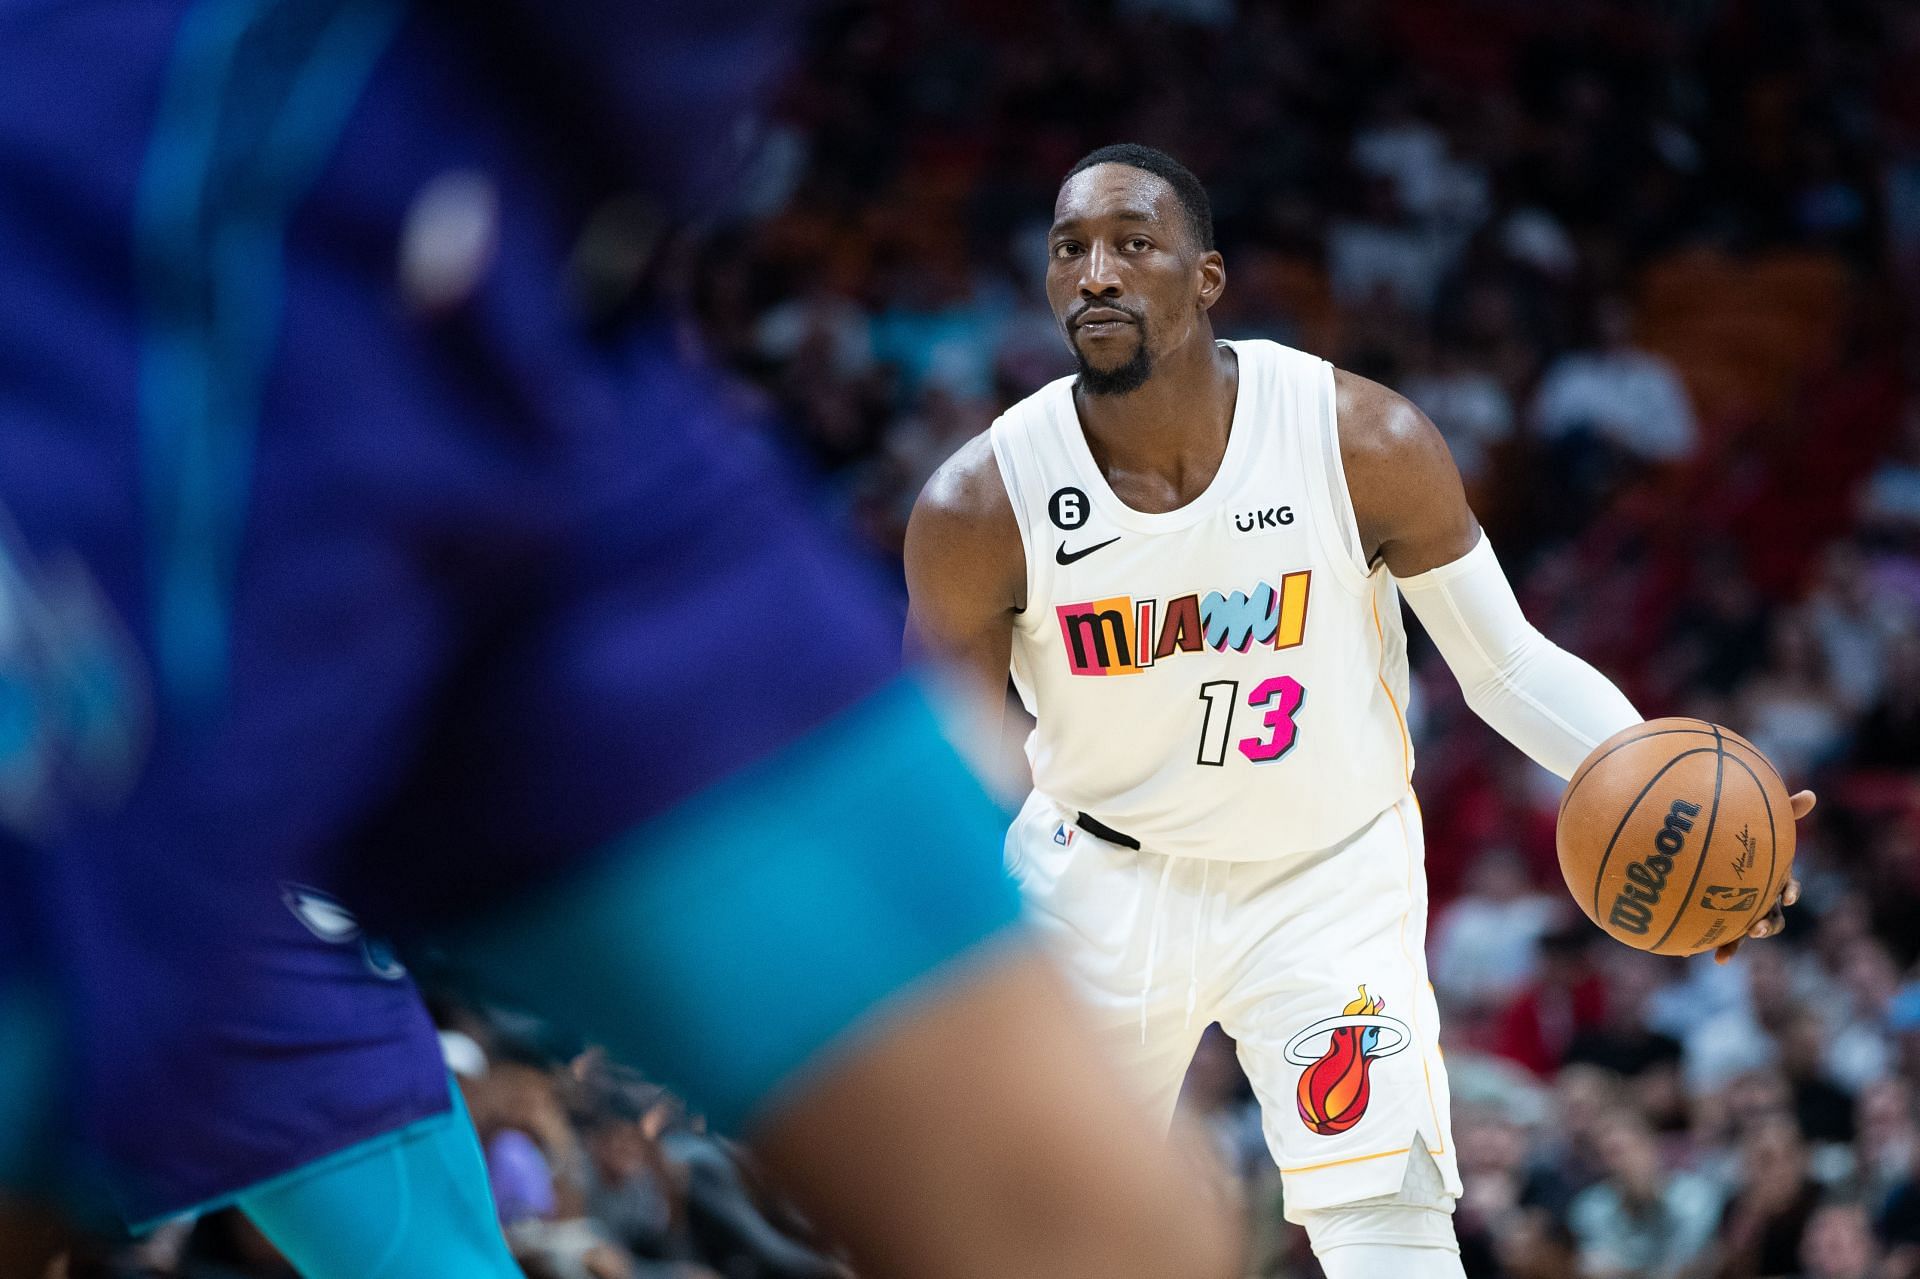 Bam Adebayo is one of the newest Jordan Brand athletes (Image via Getty Images)